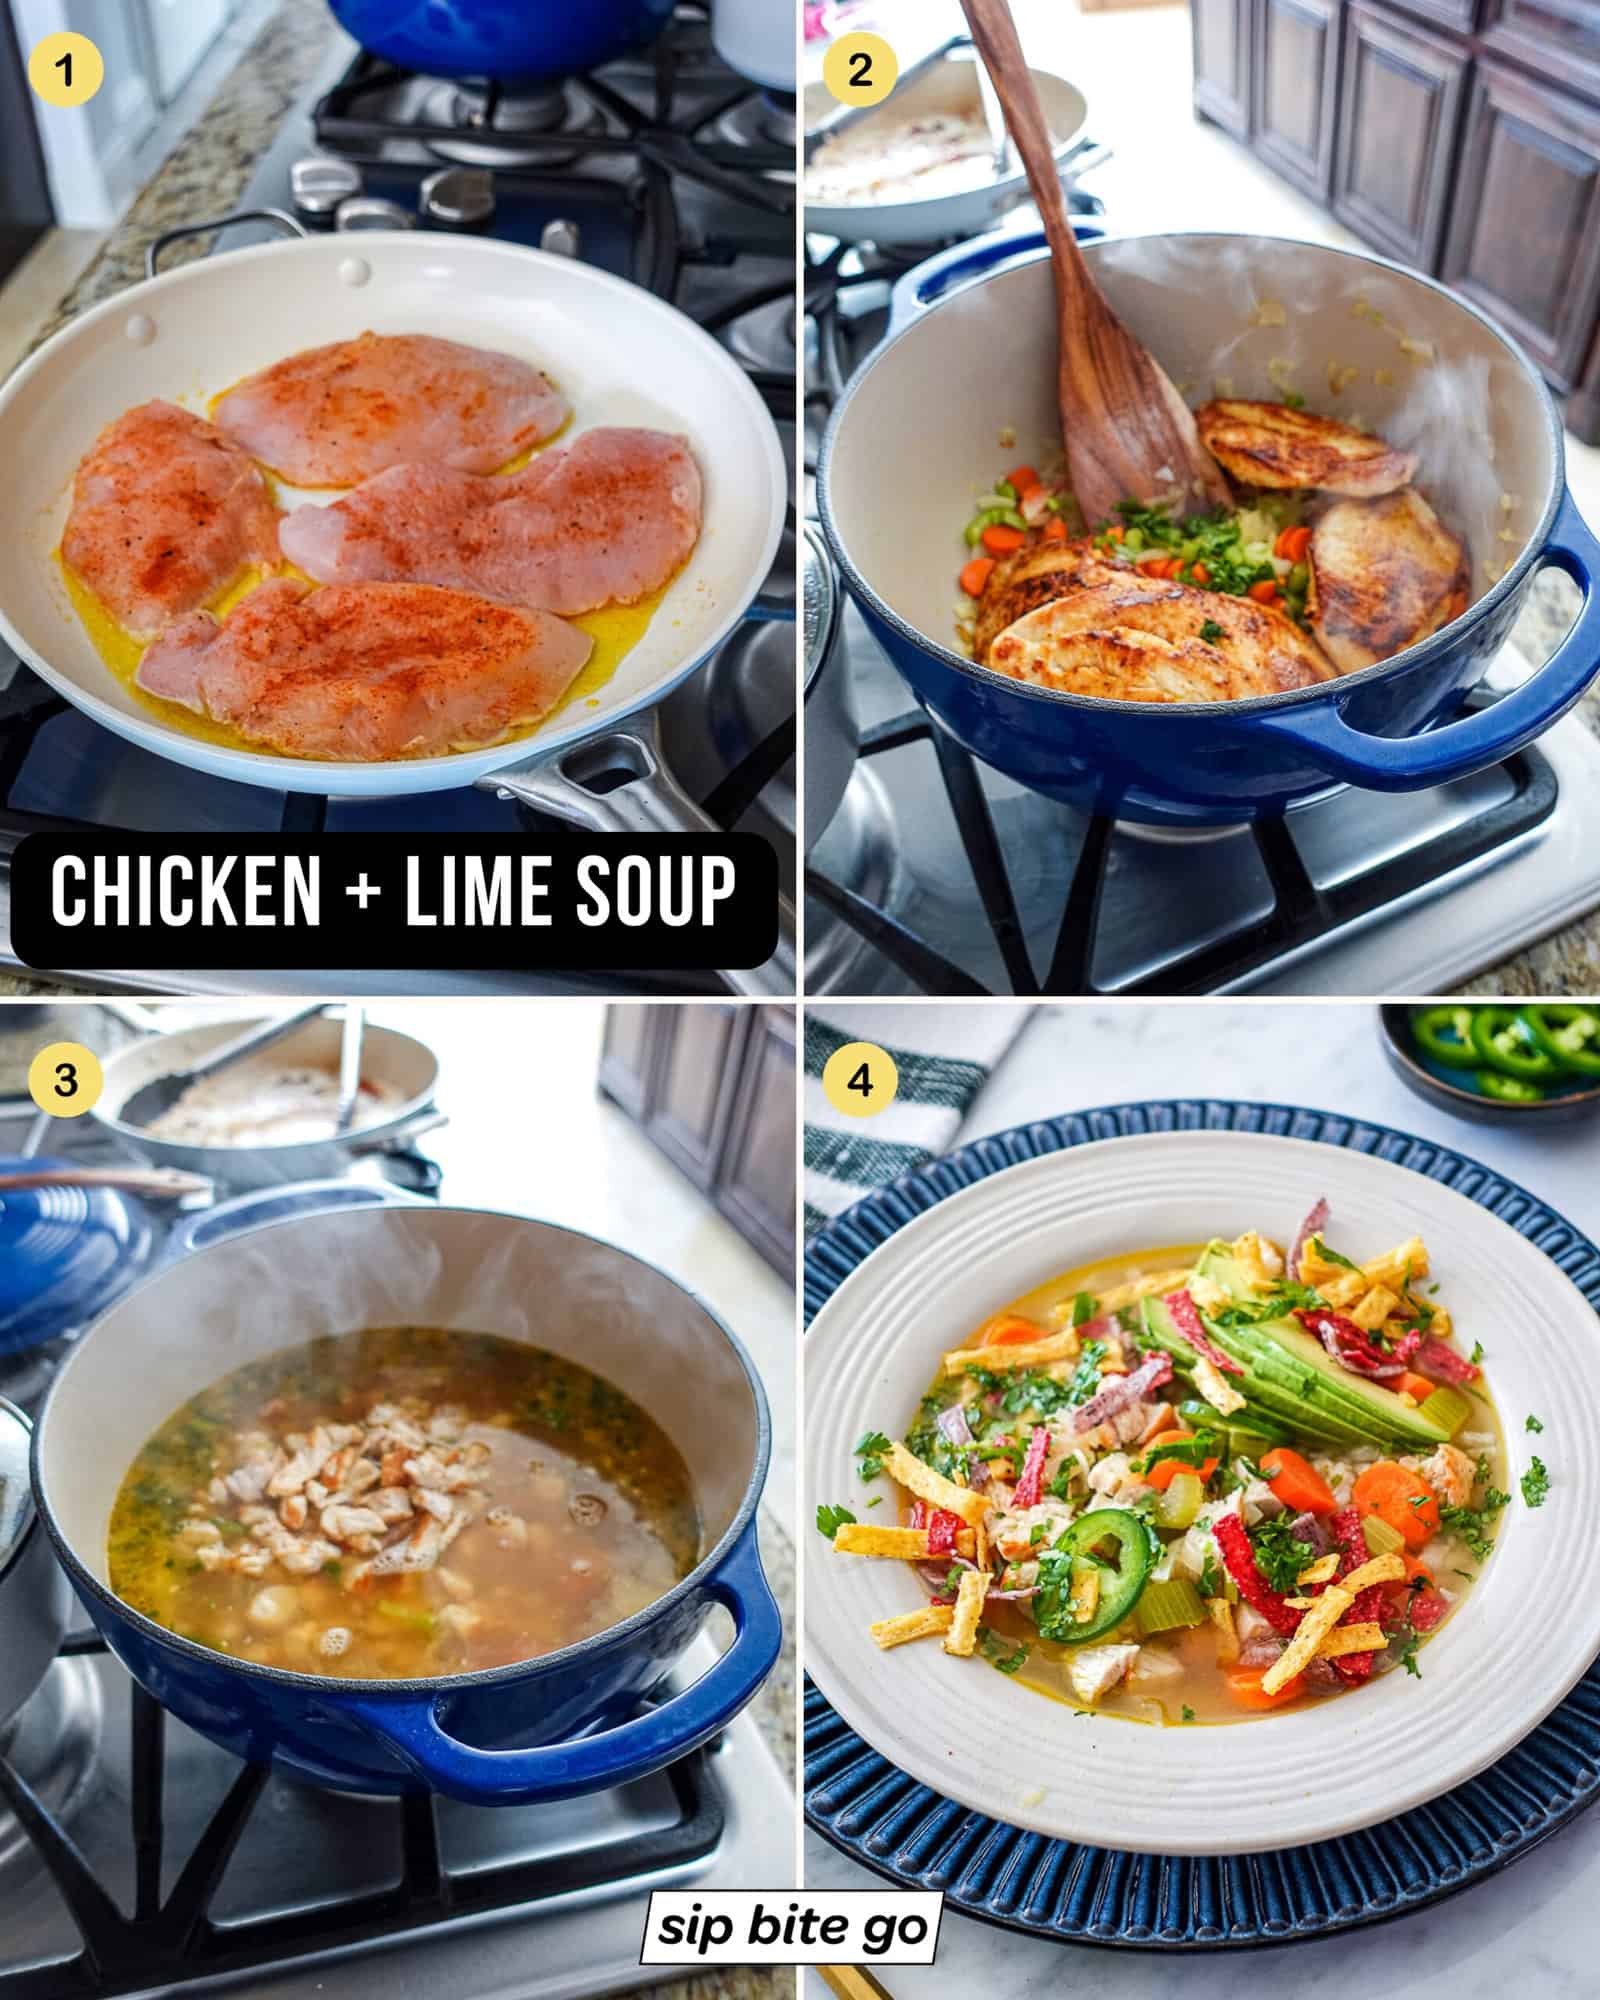 Infographic with recipe steps for cooking Chicken and Lime Soup.jpg